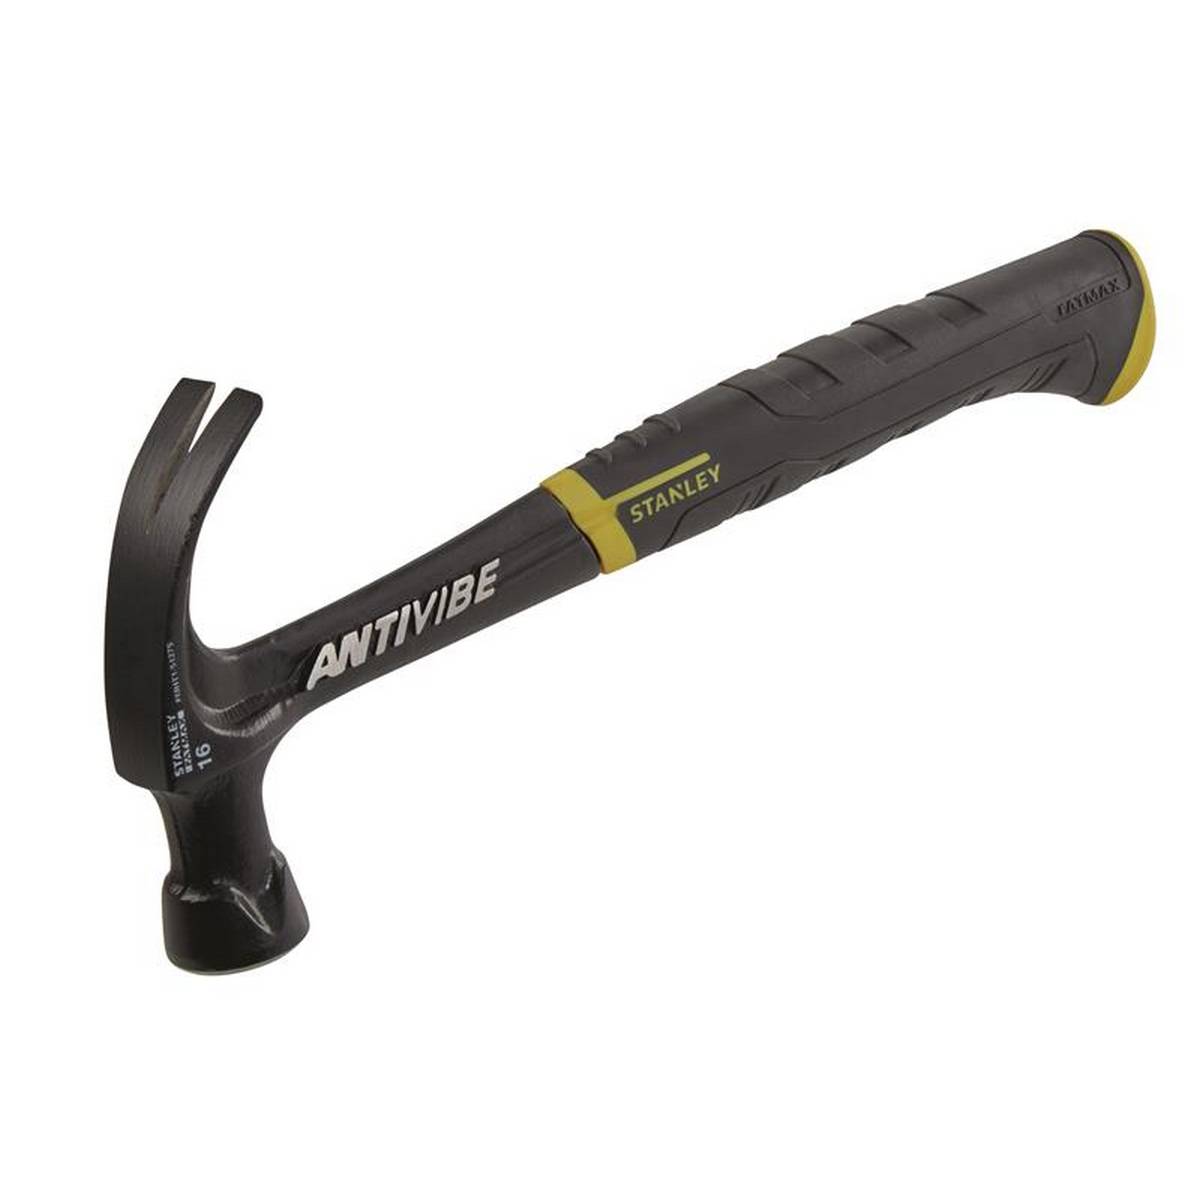 STANLEY® FatMax® AntiVibe All Steel Curved Claw Hammer 450g (16oz)